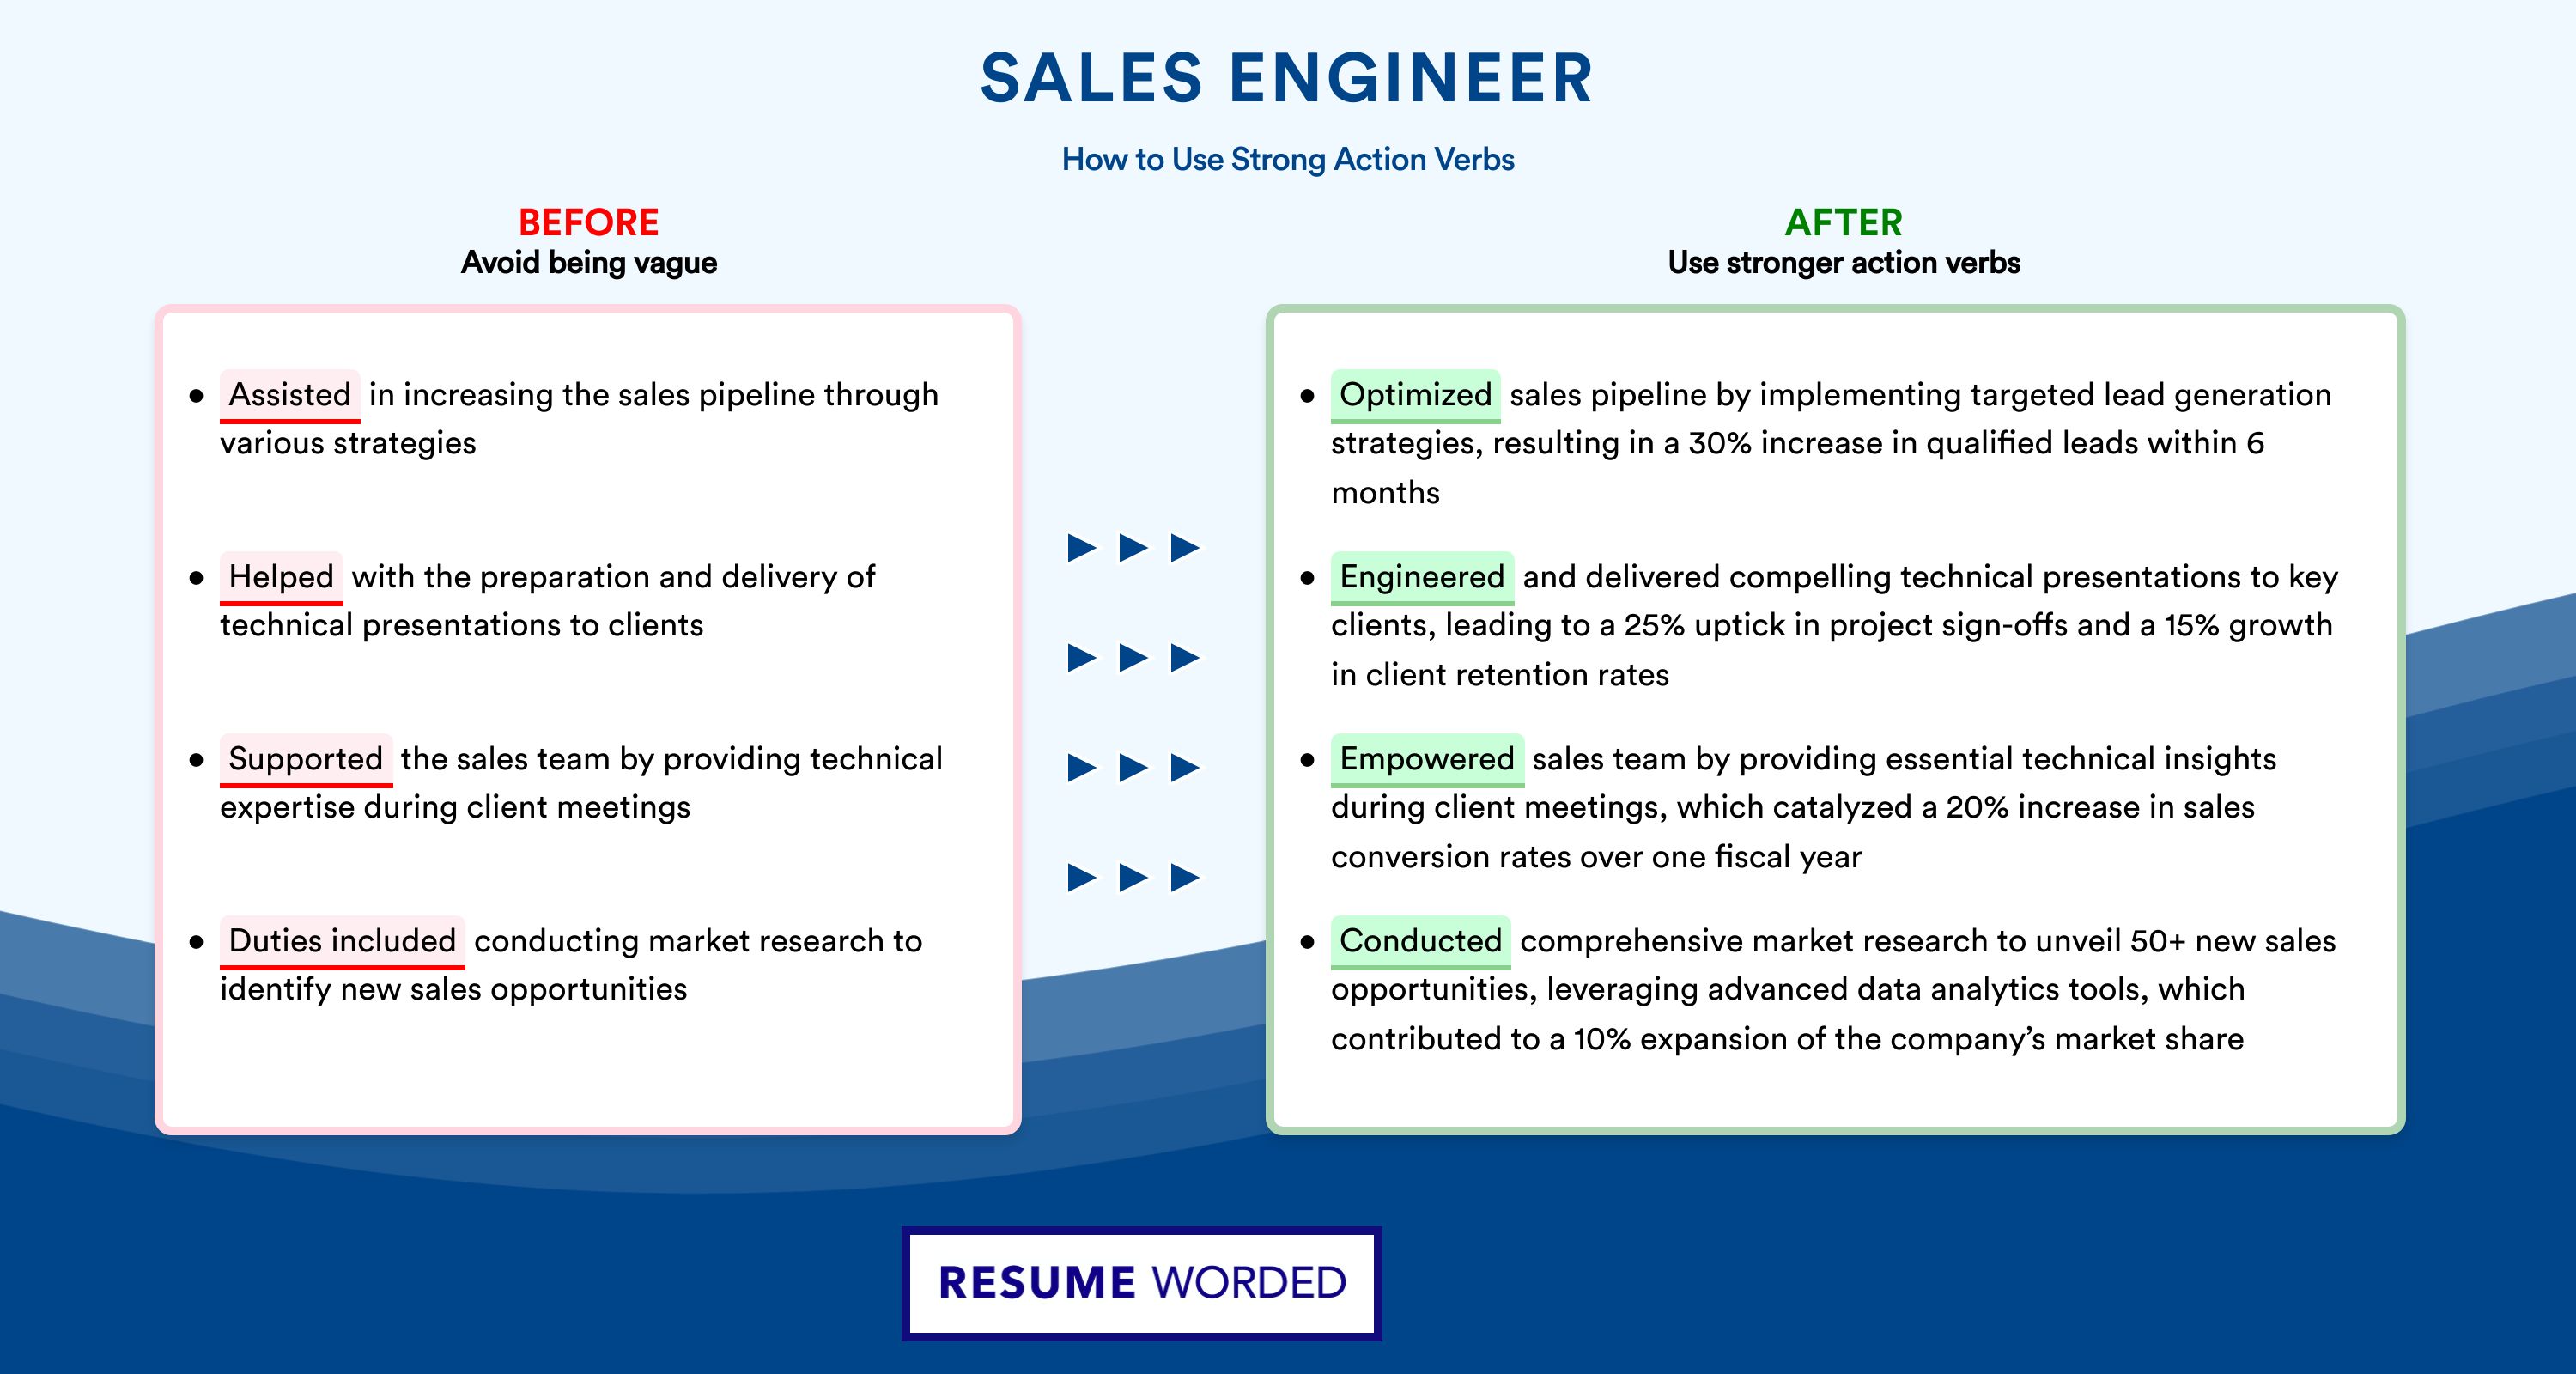 Action Verbs for Sales Engineer